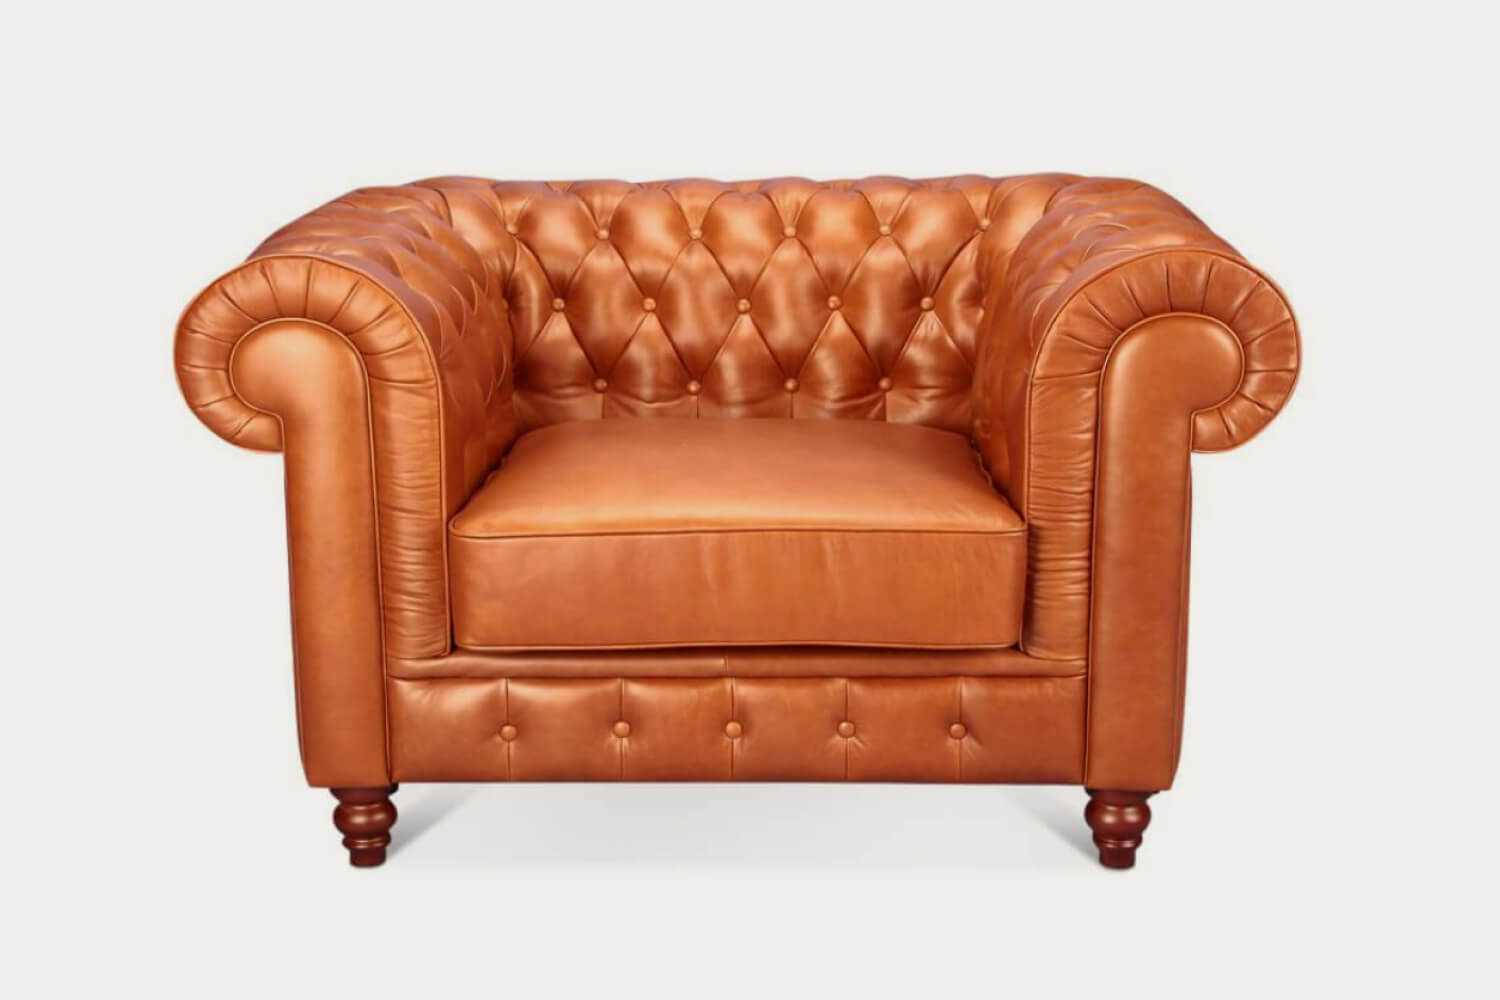 A luxurious Chesterfield Sofa One Seater is presented against a white background.